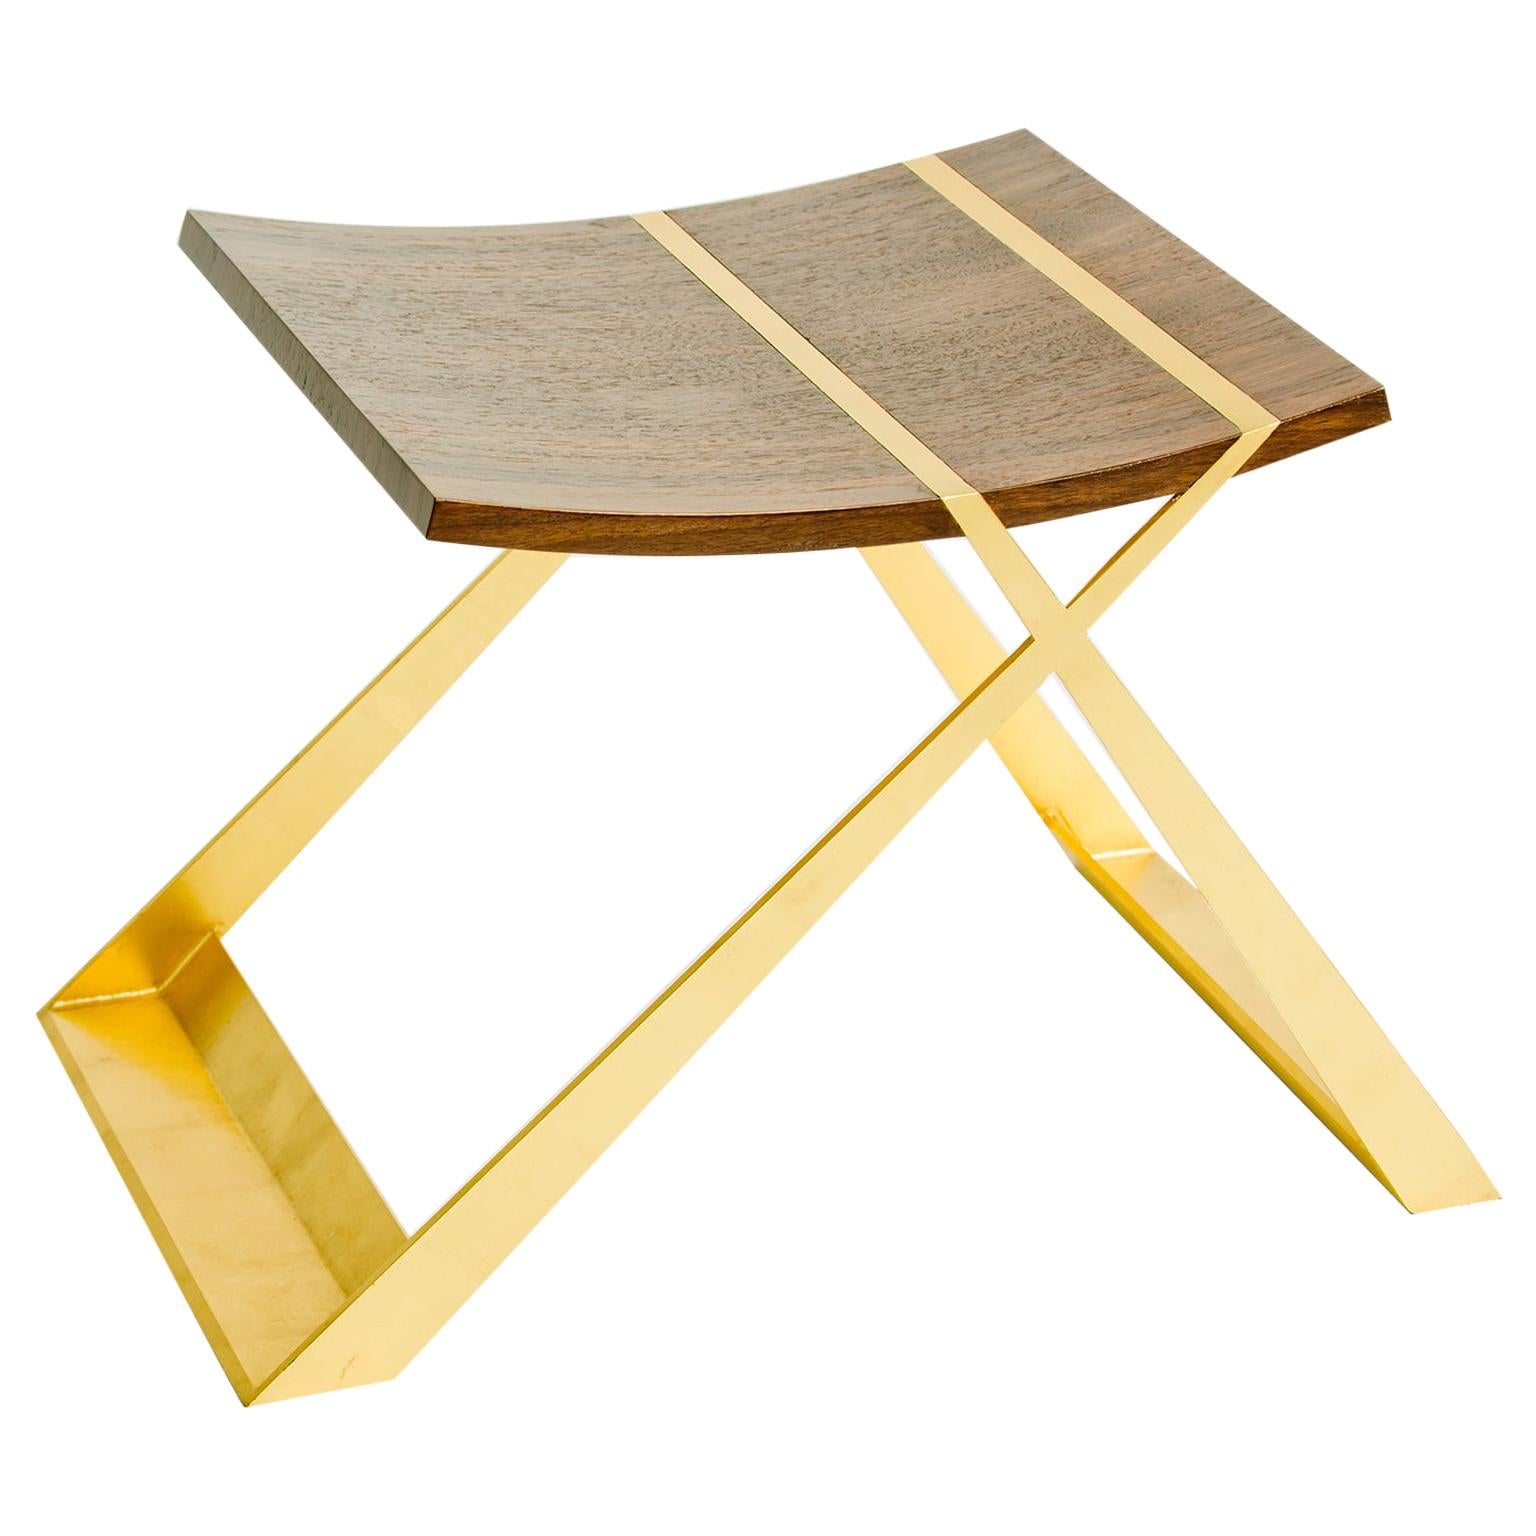 Wooster Stool, in Walnut and Gold Leaf, by Dean and Dahl